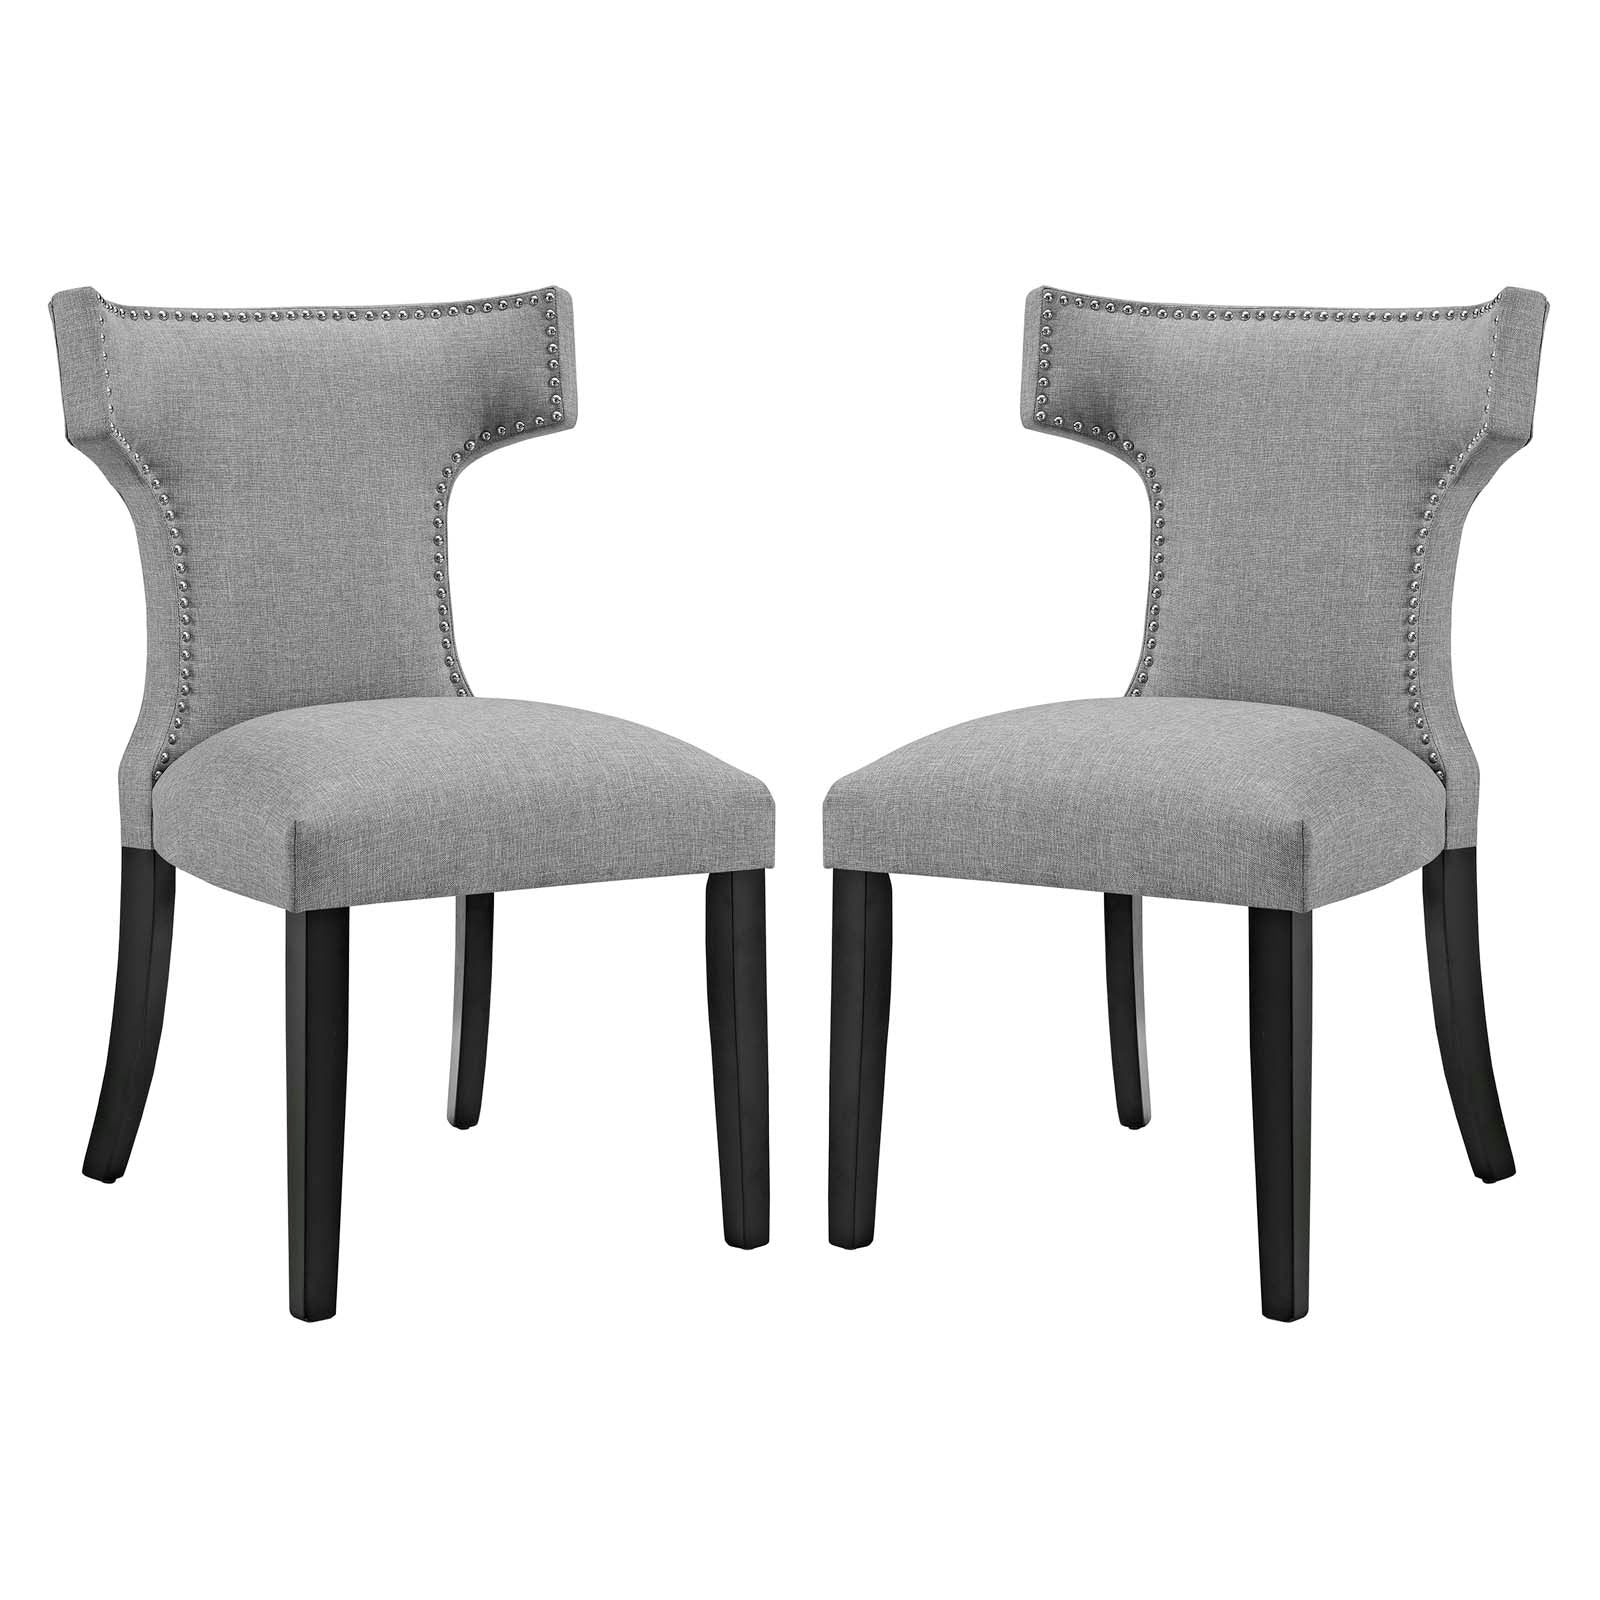 Modway Dining Chairs - Curve Dining Side Chair Fabric ( Set of 2 ) Light Gray